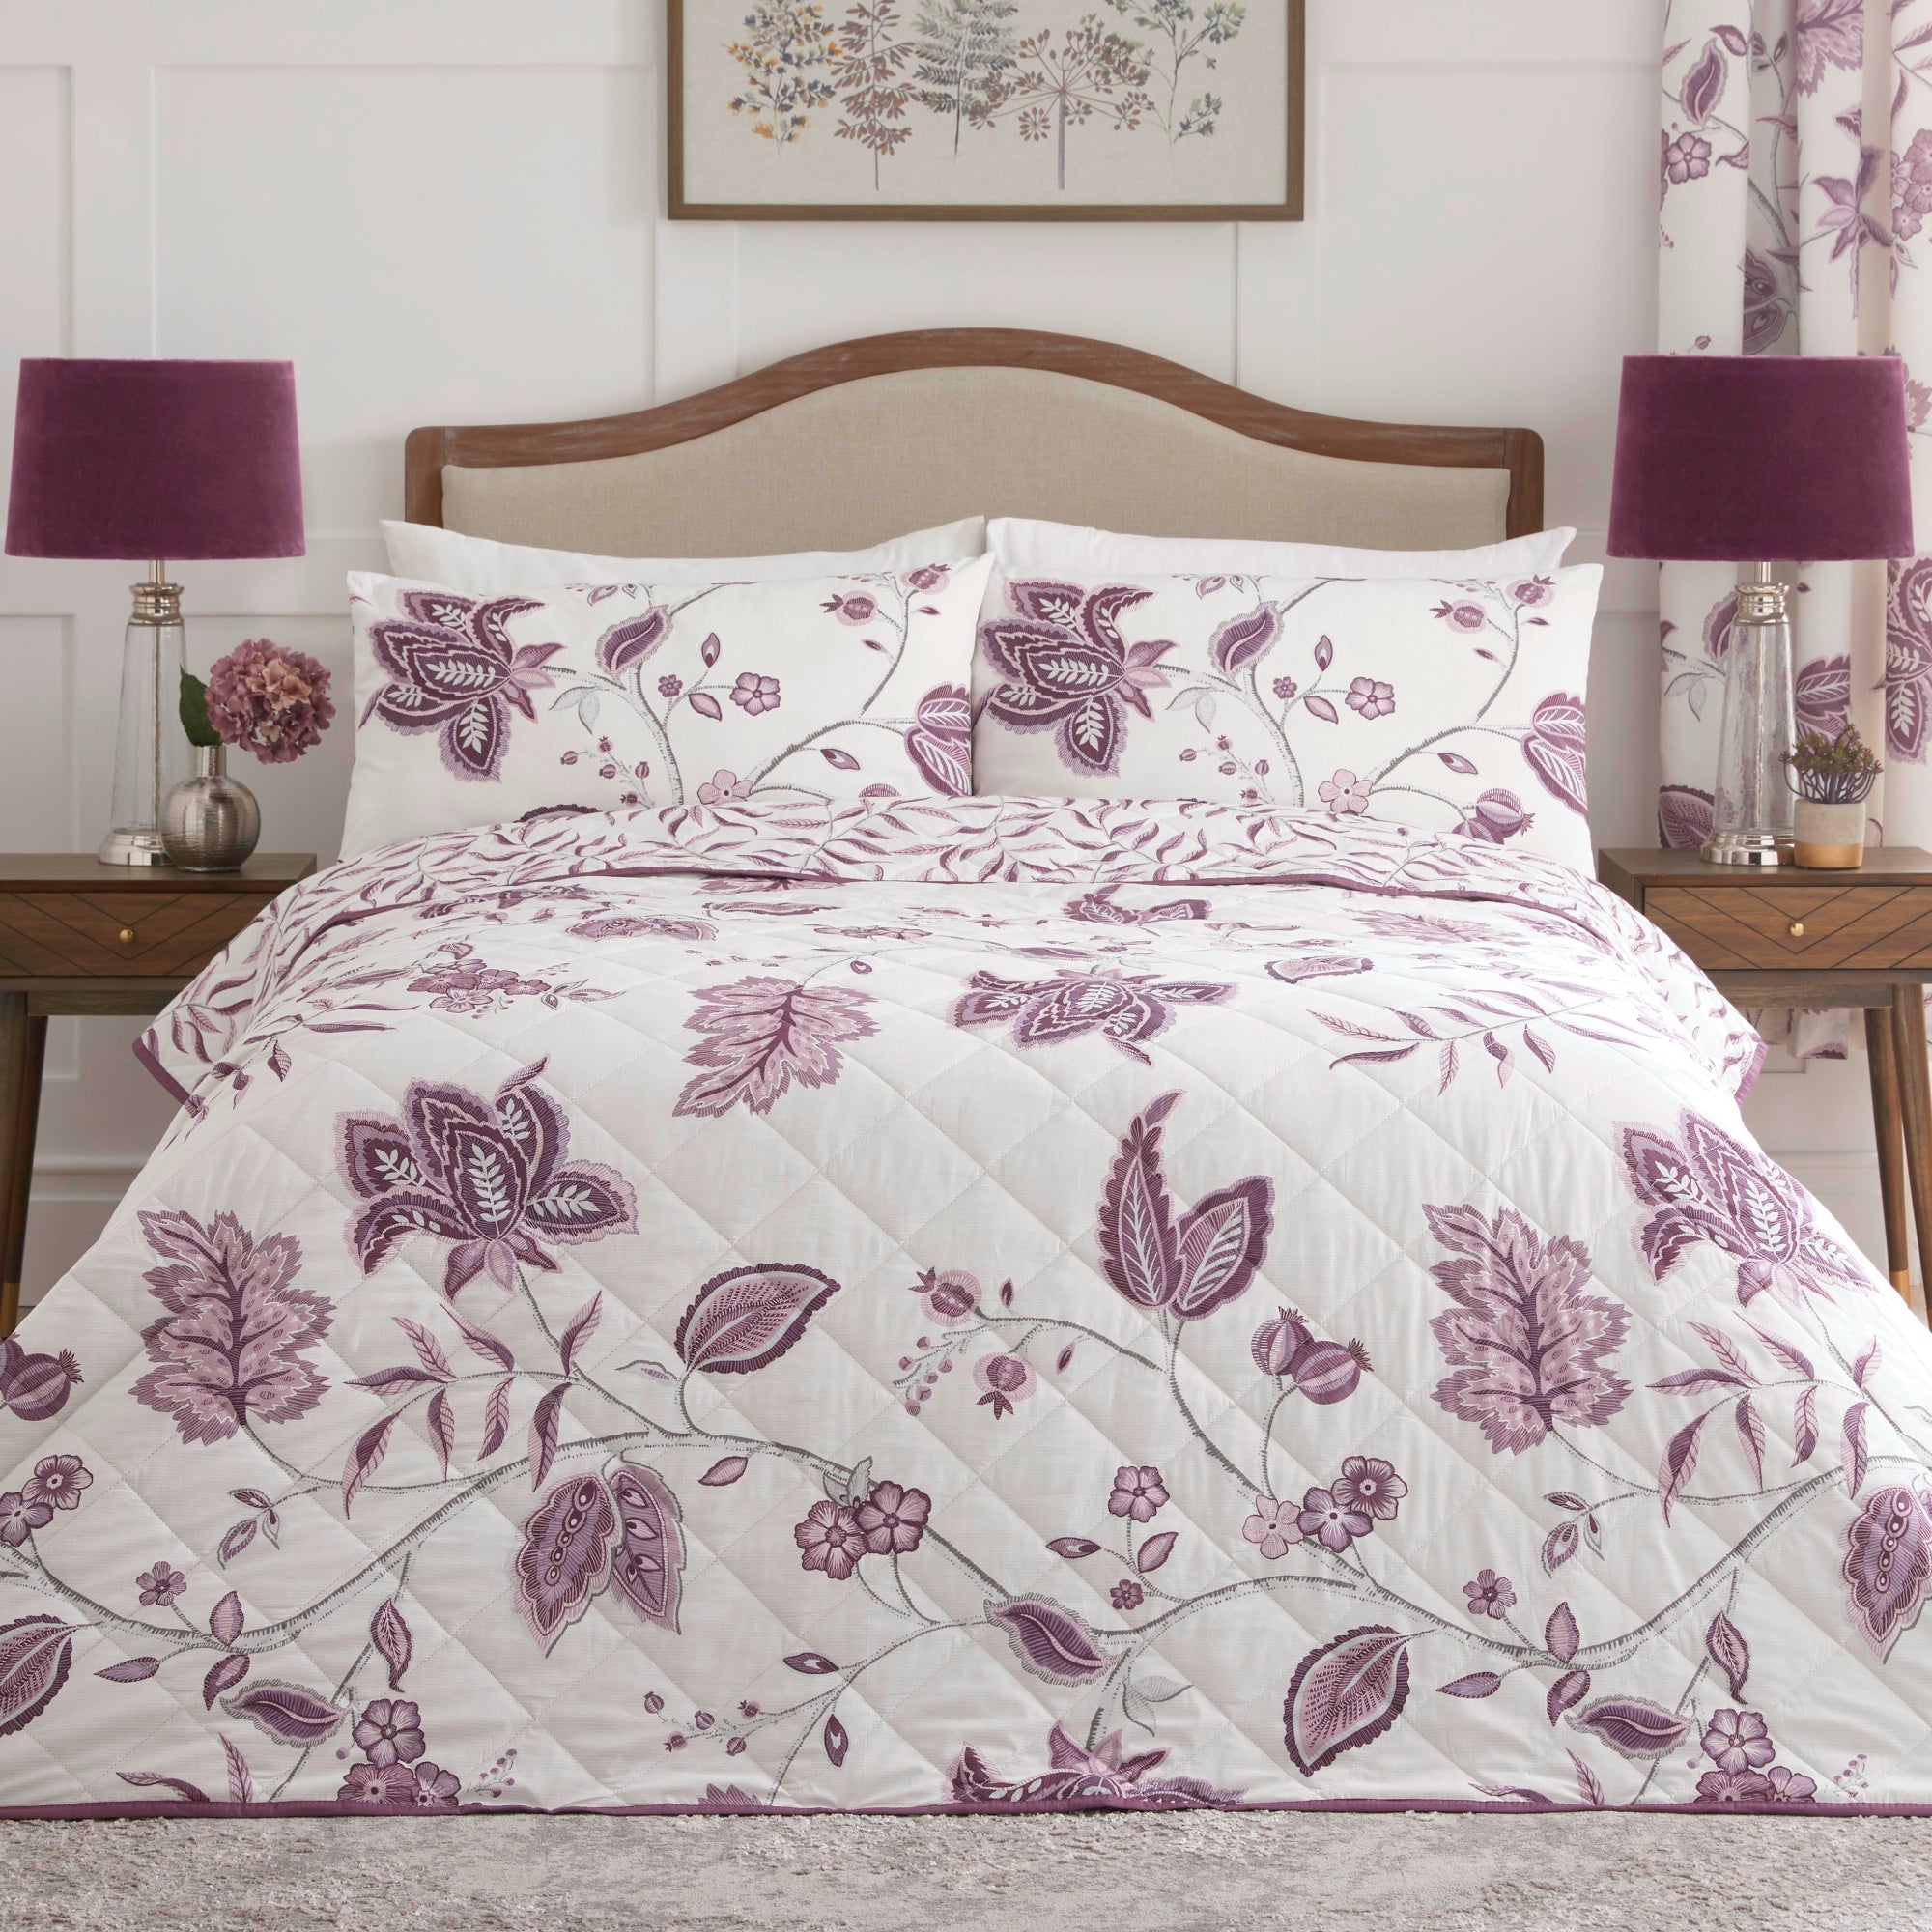 Bedspread Samira by Dreams And Drapes Design in Plum